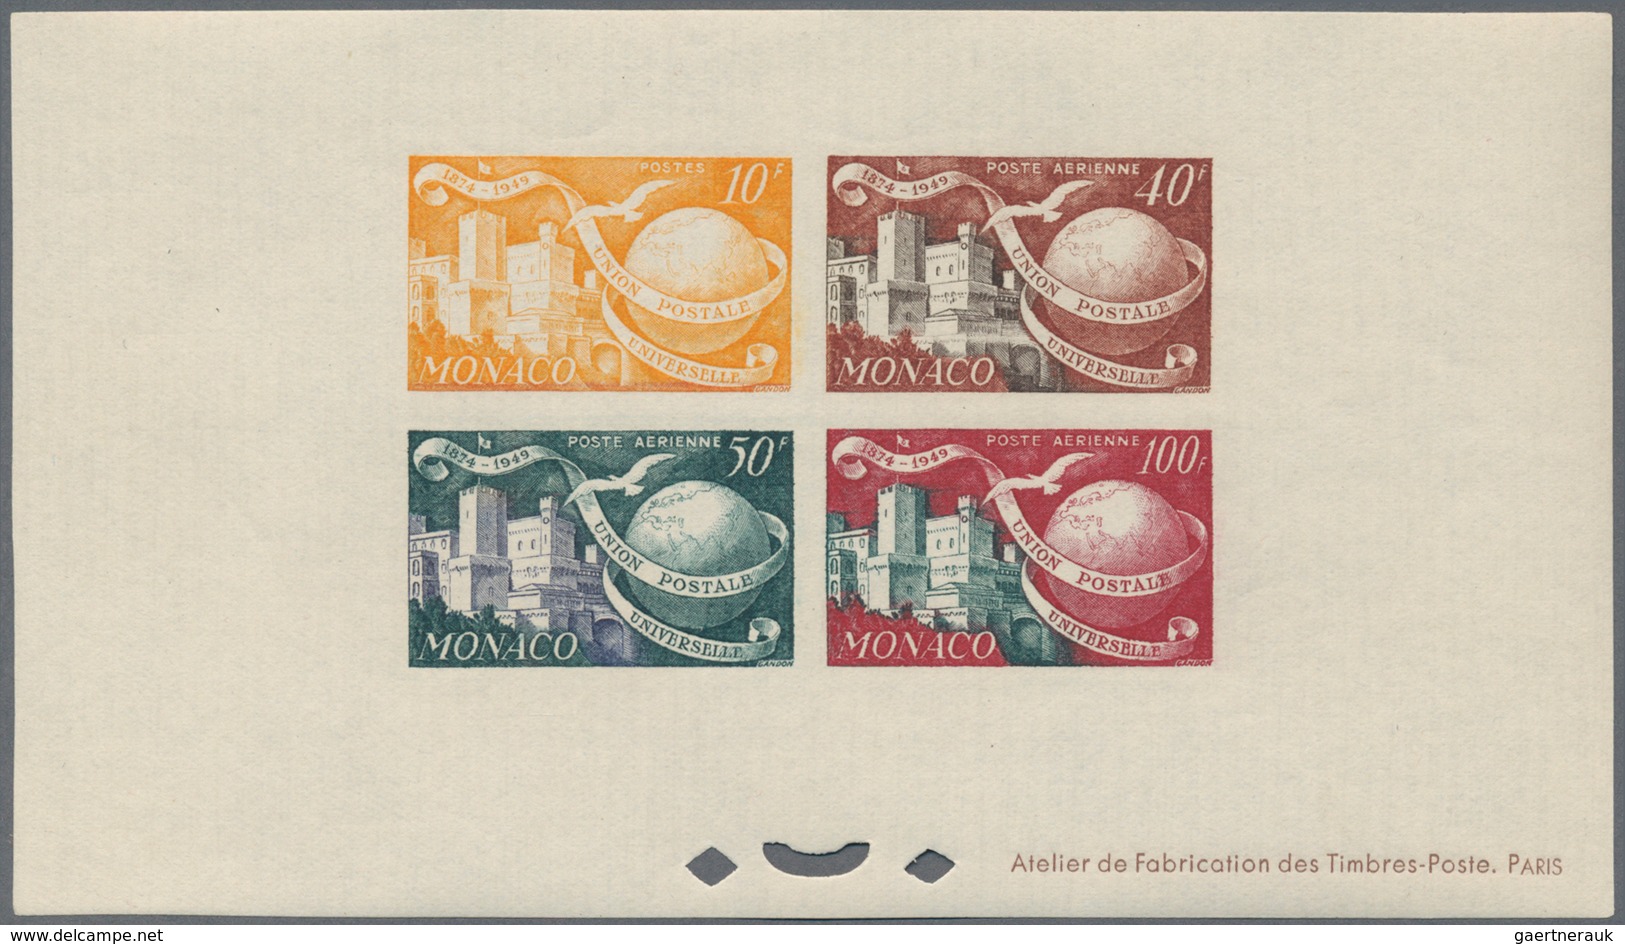 Monaco: 1949, 75 years UPU lot of MNH epreuve d'artiste imperforated and perfortated: 5f., 15f. and